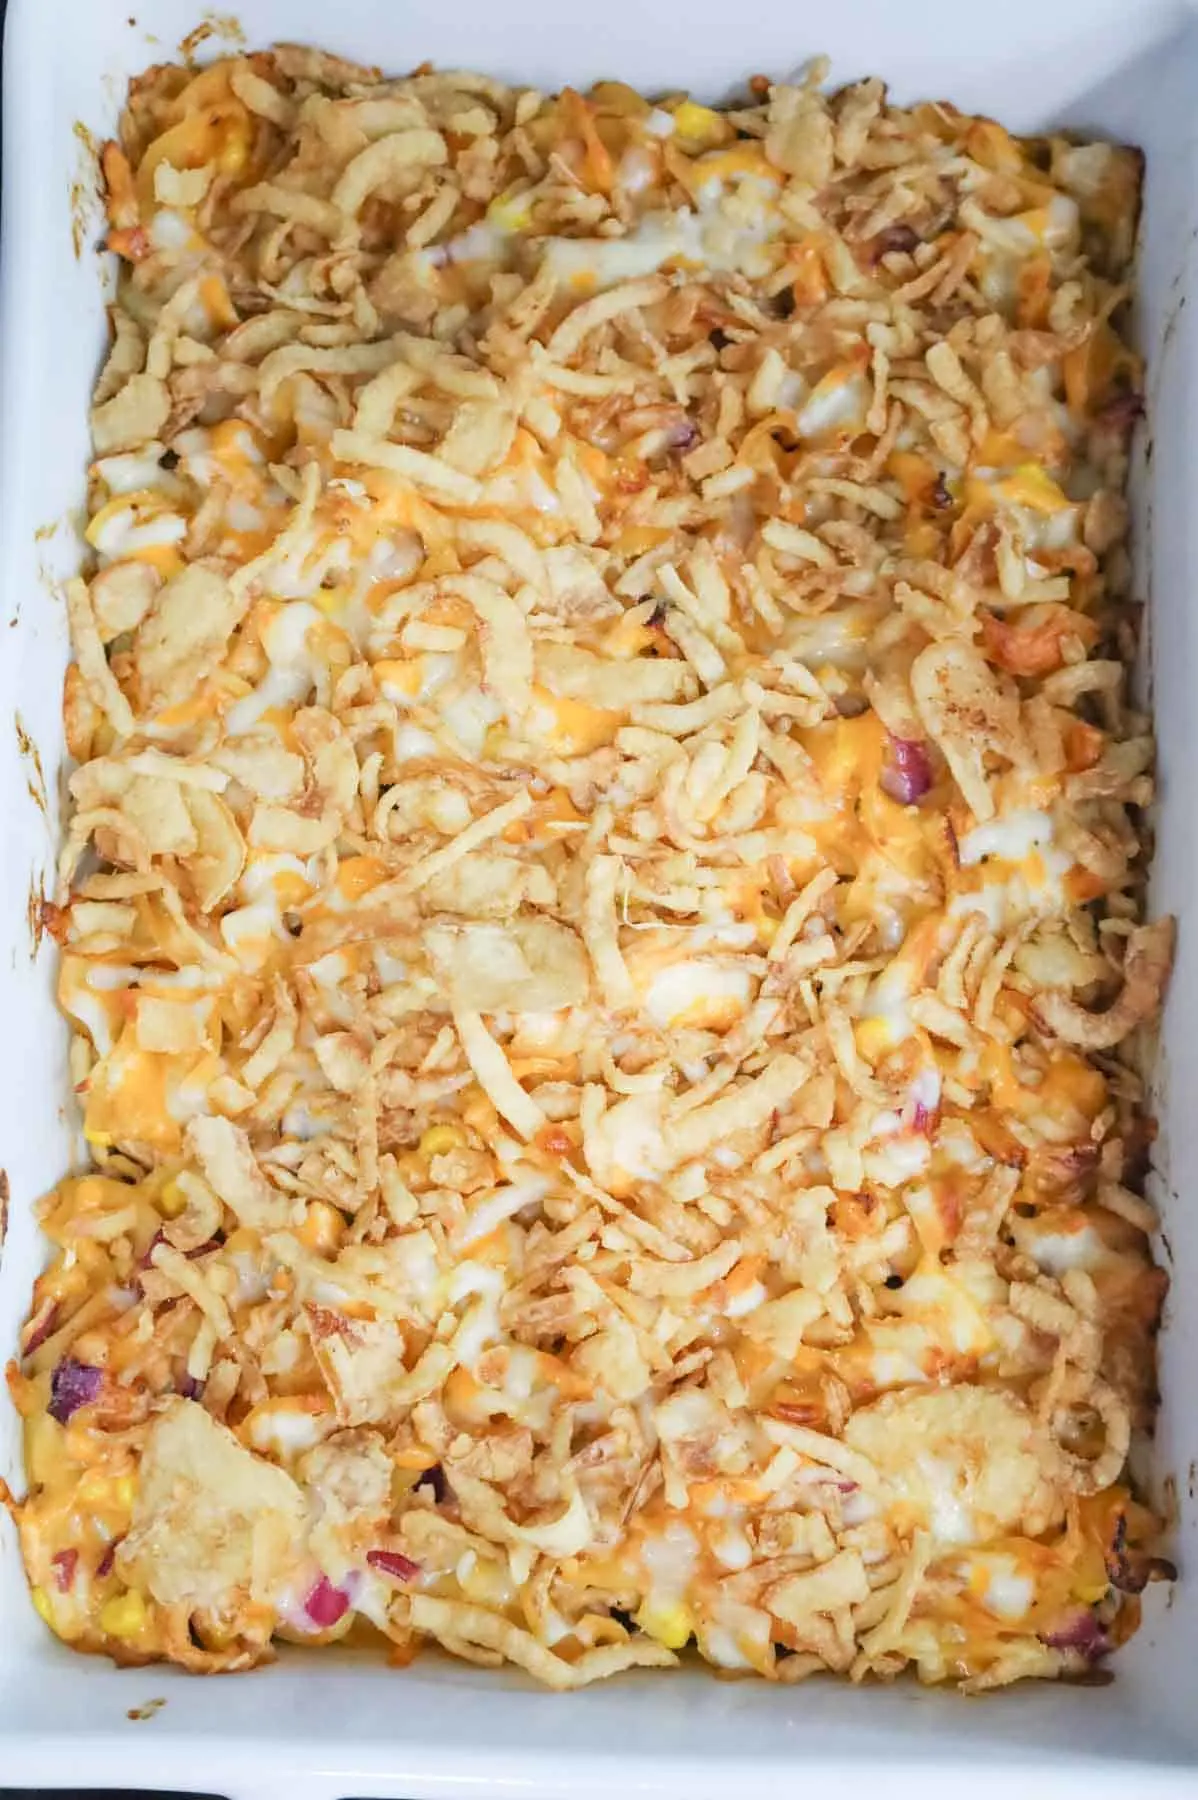 French's crispy fried onions on top of cheesy barbecue chicken casserole